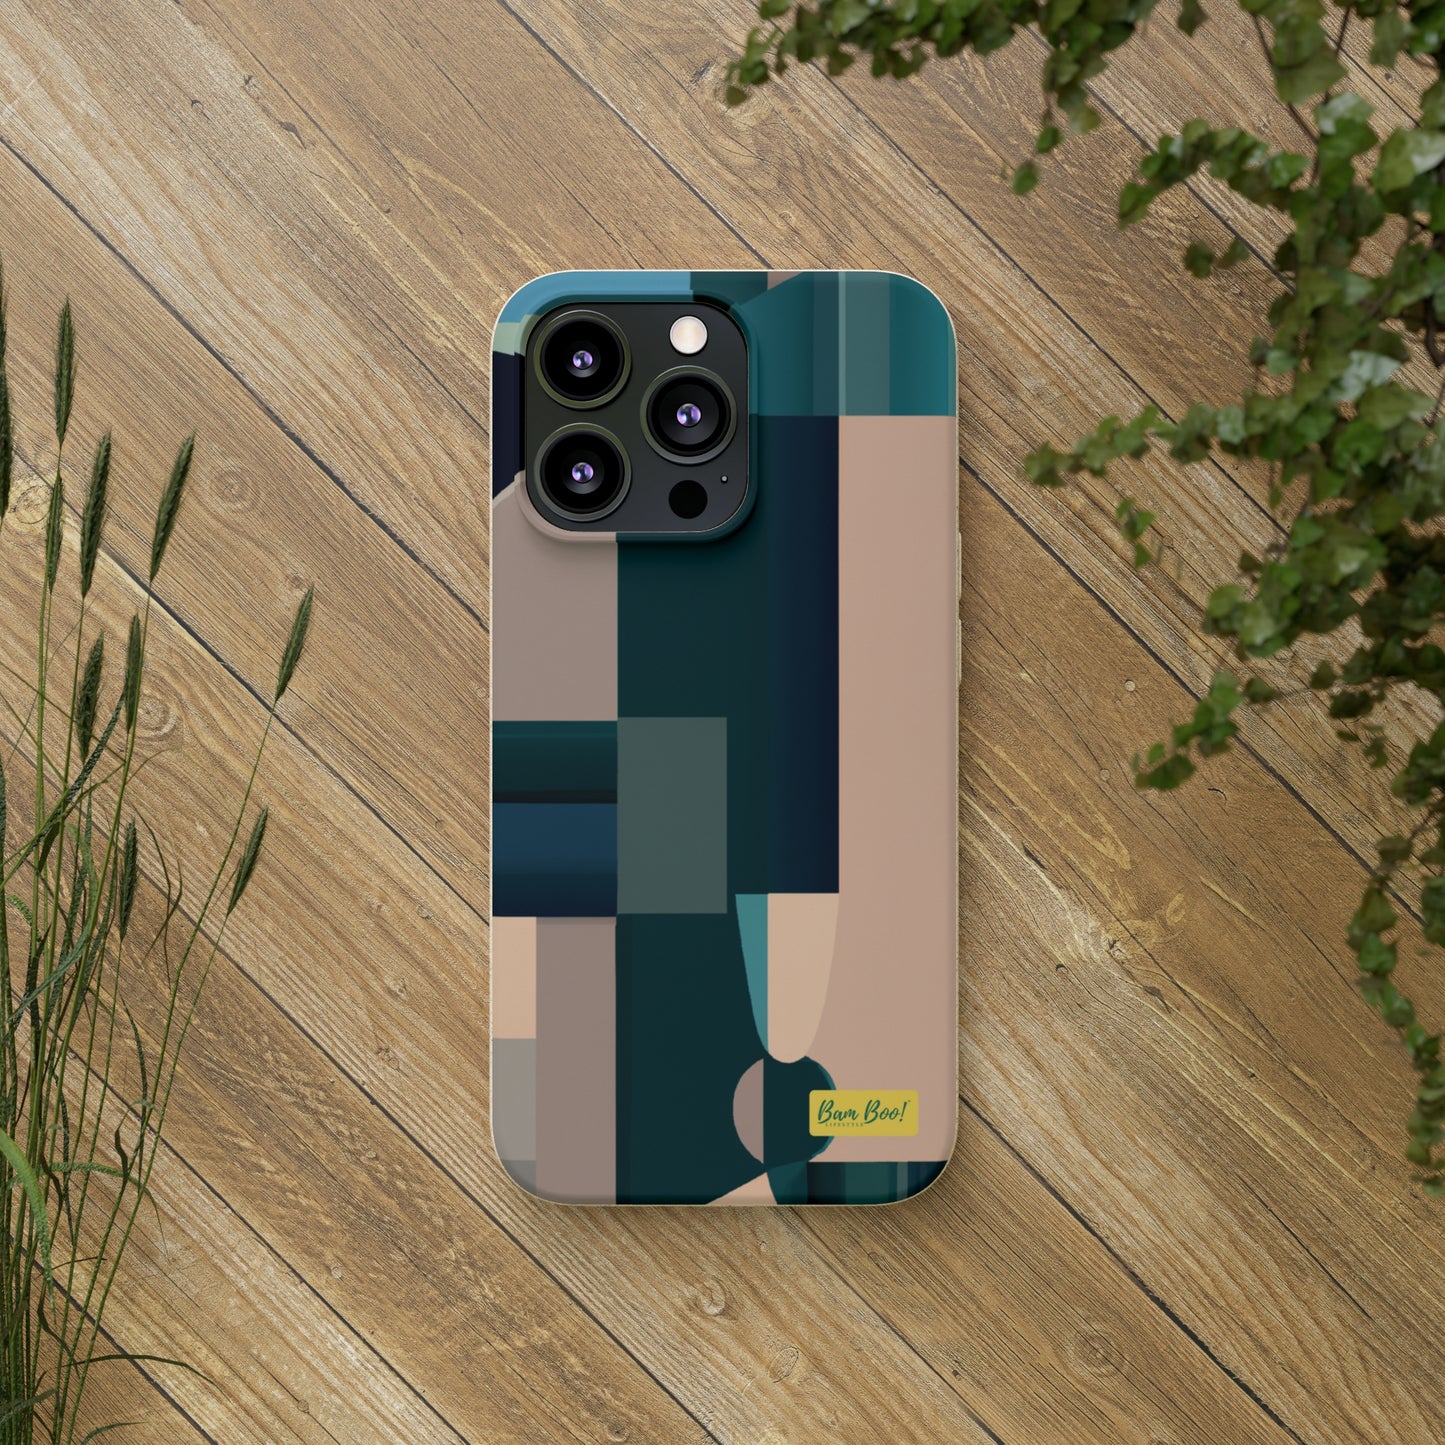 Synthesis of the Digital & Analog: An Exploration of Texture, Shape, Color, and Pattern. - Bam Boo! Lifestyle Eco-friendly Cases